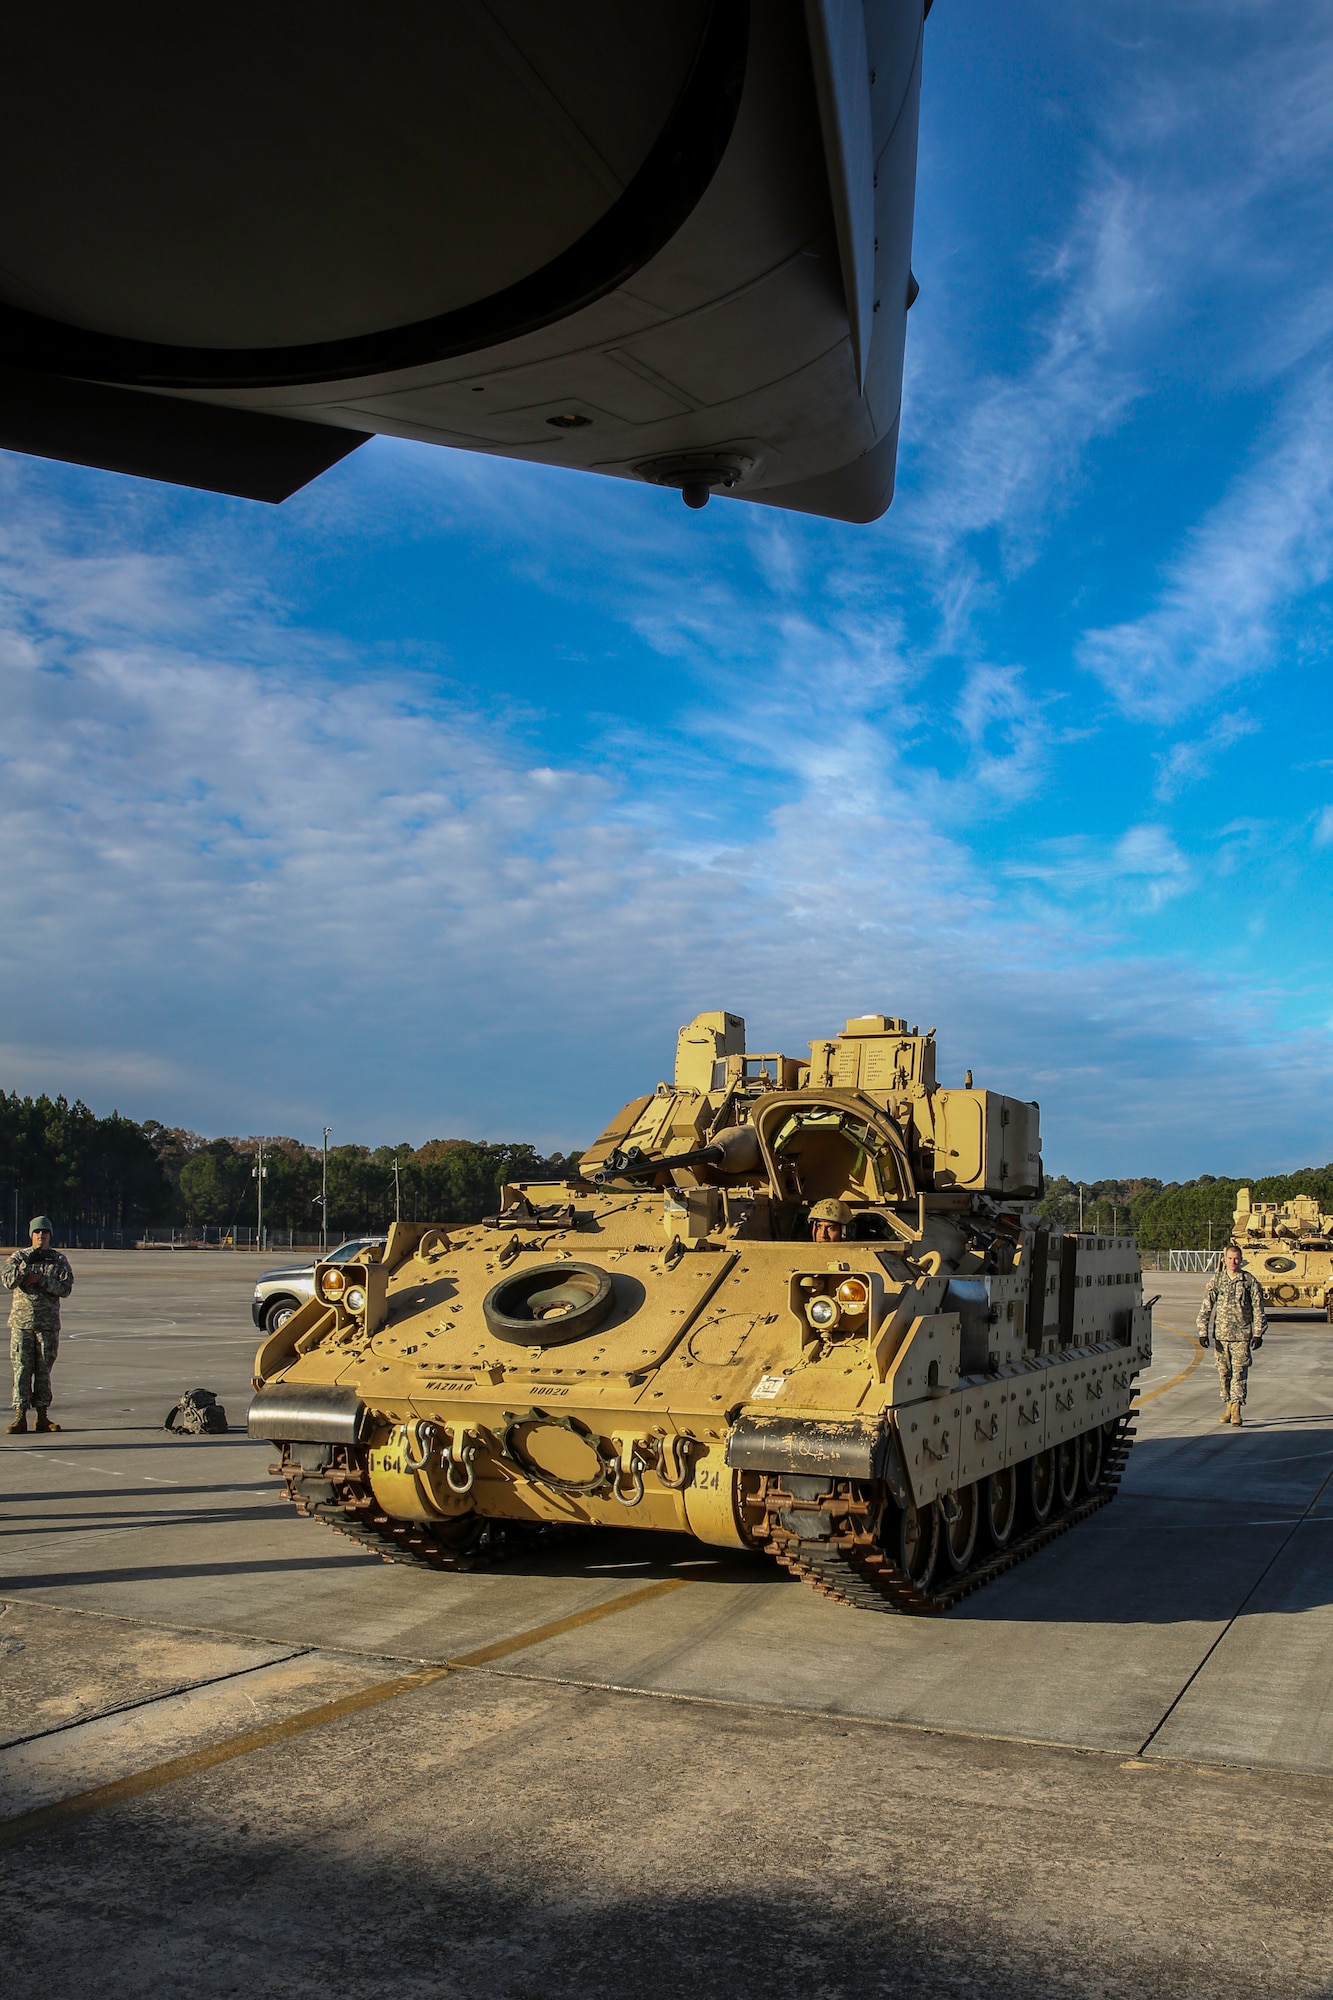 An M2A3 Bradley Fighting Vehicle makes a slow approach toward the ramp of a C-17 Globemaster III Dec. 11, 2014 at Hunter Army Airfield, Ga. The vehicle was used as cargo during a two-day exercise which integrated C-17 air and ground crew training for 315th Airlift Wing Airmen stationed at Joint Base Charleston, S.C. as well as Soldiers from one of the 3rd Infantry Division’s Immediate Ready Companies stationed at Fort Stewart, Ga. Four C-17’s were used during the exercise to deploy and redeploy two Abrams M1A2 tanks, an M88 recovery vehicle and two M2A3 Bradley Fighting Vehicles. (U.S. Air Force photo by Tech. Sgt. Shane Ellis)